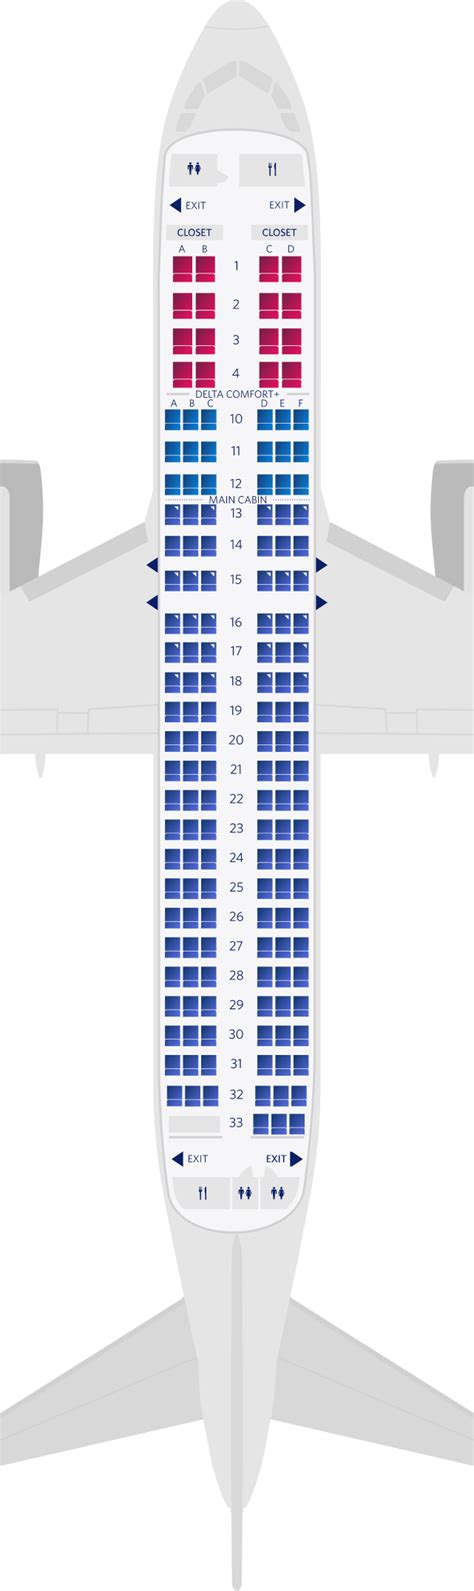 Airbus A320 200 Seat Maps Specs Amenities Delta Air Lines